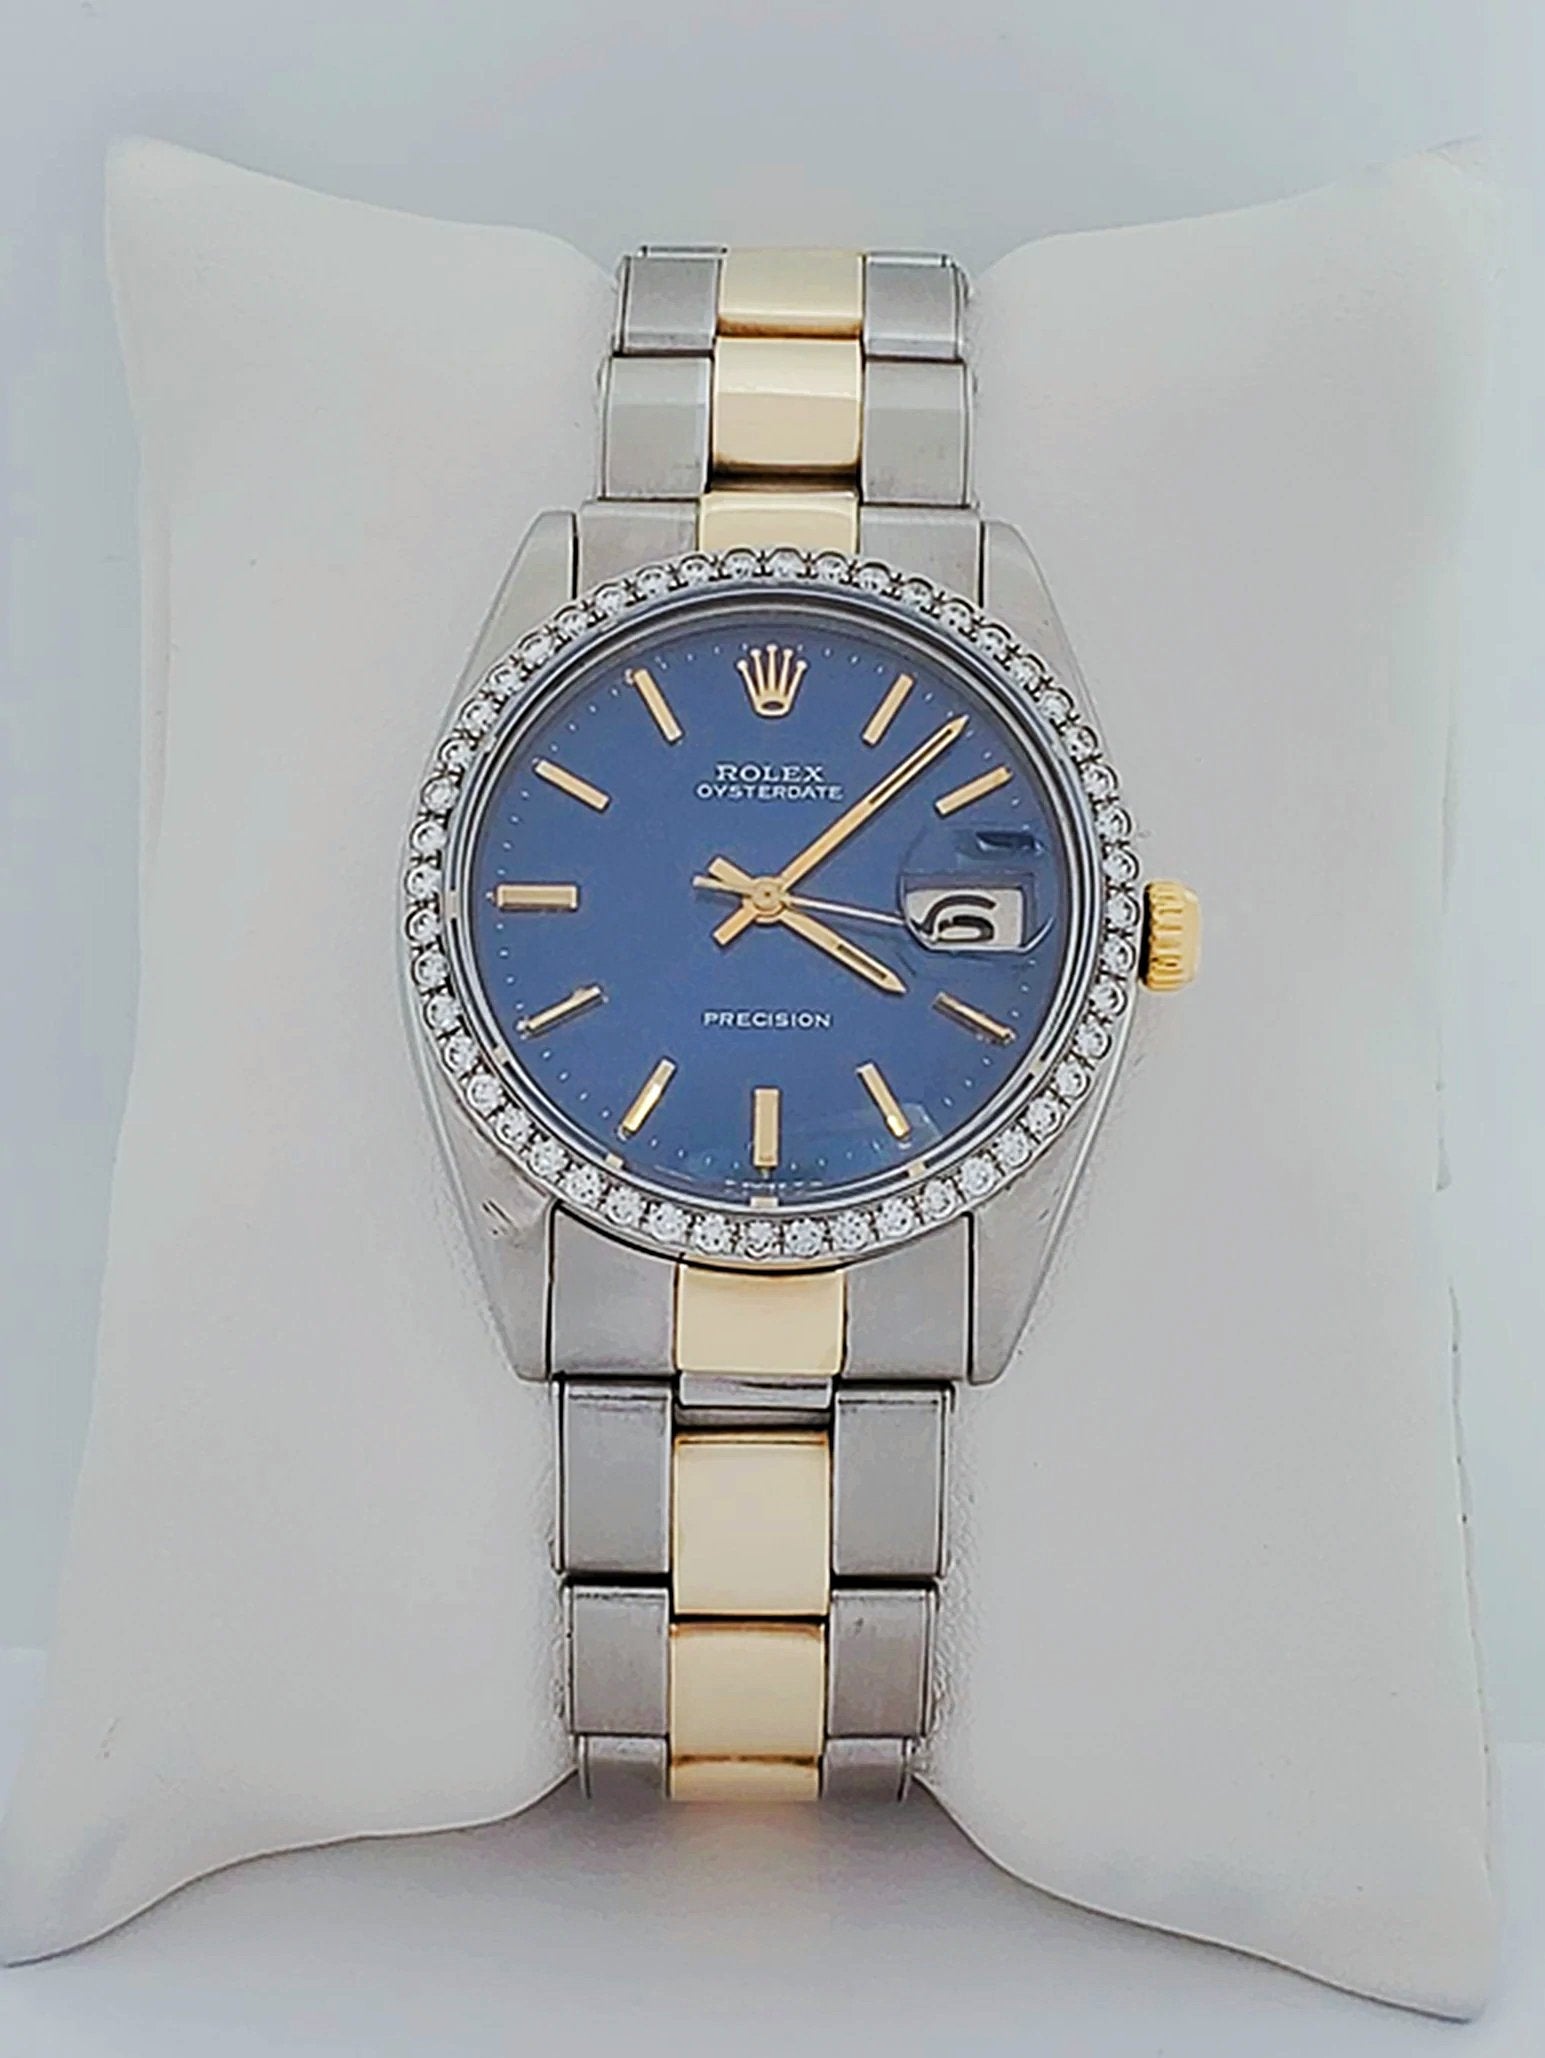 Unisex Rolex OysterDate 34mm Two Tone 14K Yellow Gold / Stainless Steel Watch with Blue Dial and Custom Diamond Bezel. (Pre-Owned 6694)